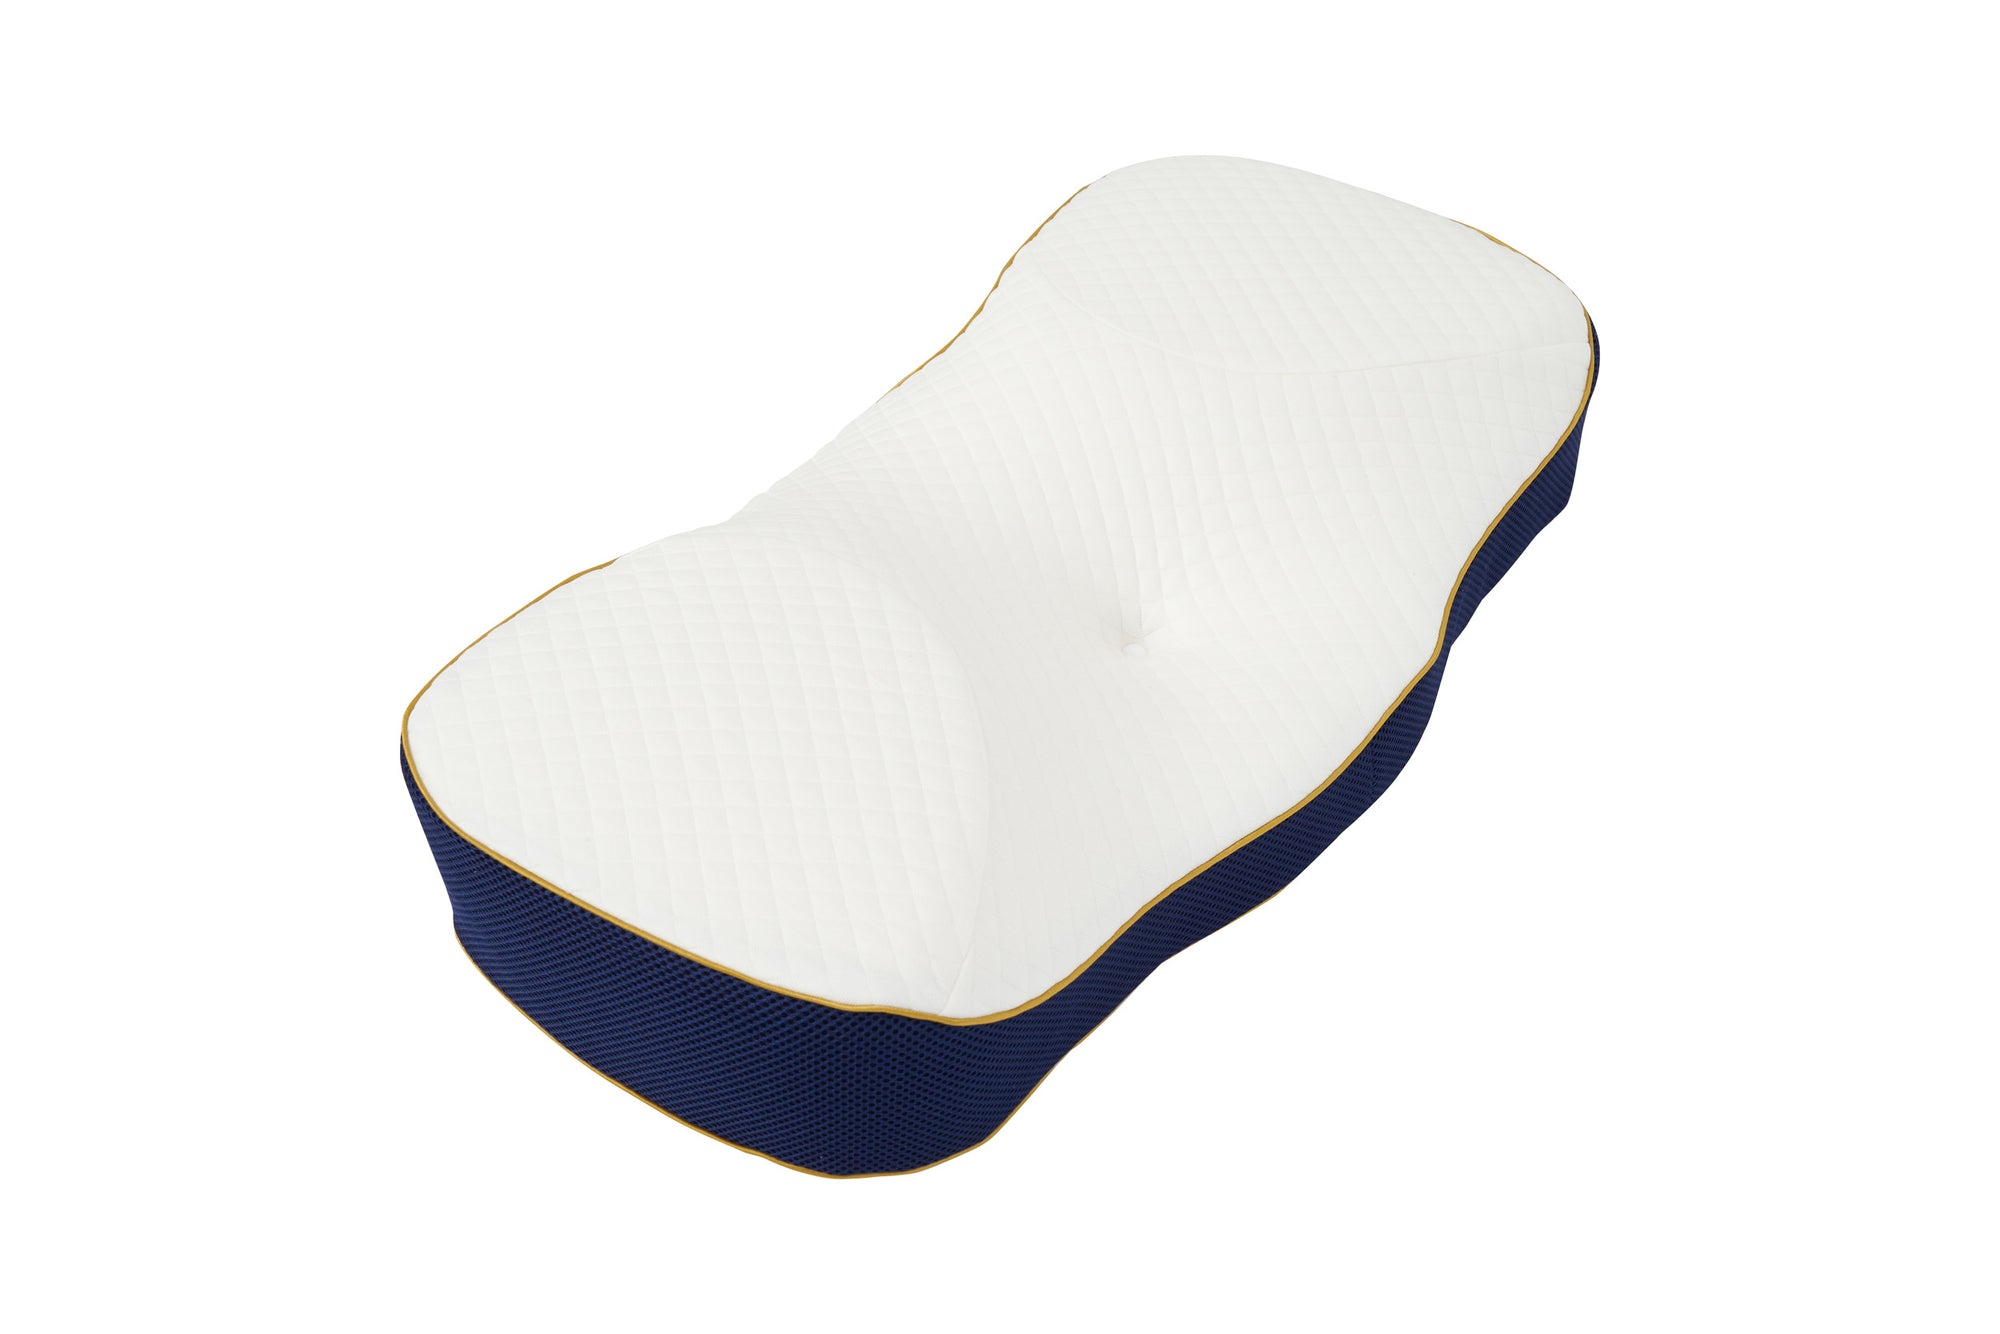 ComfyCozy Butterfly Memory Foam Pillow Case